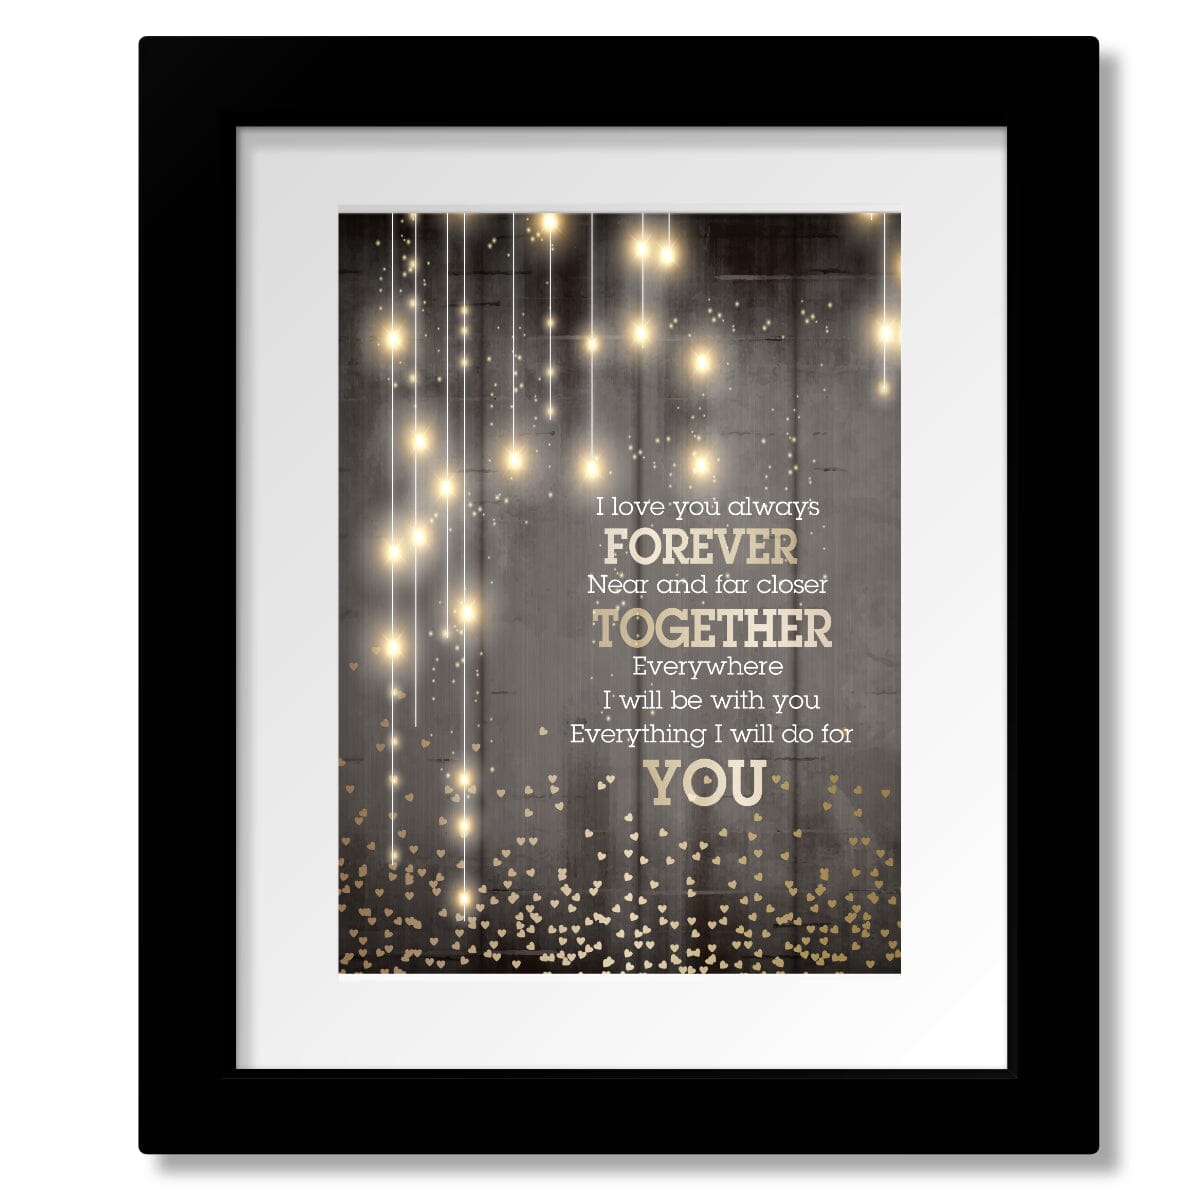 I Love You Always Forever - Donna Lewis Pop Song Lyric Print Song Lyrics Art Song Lyrics Art 8x10 Matted and Framed Print 